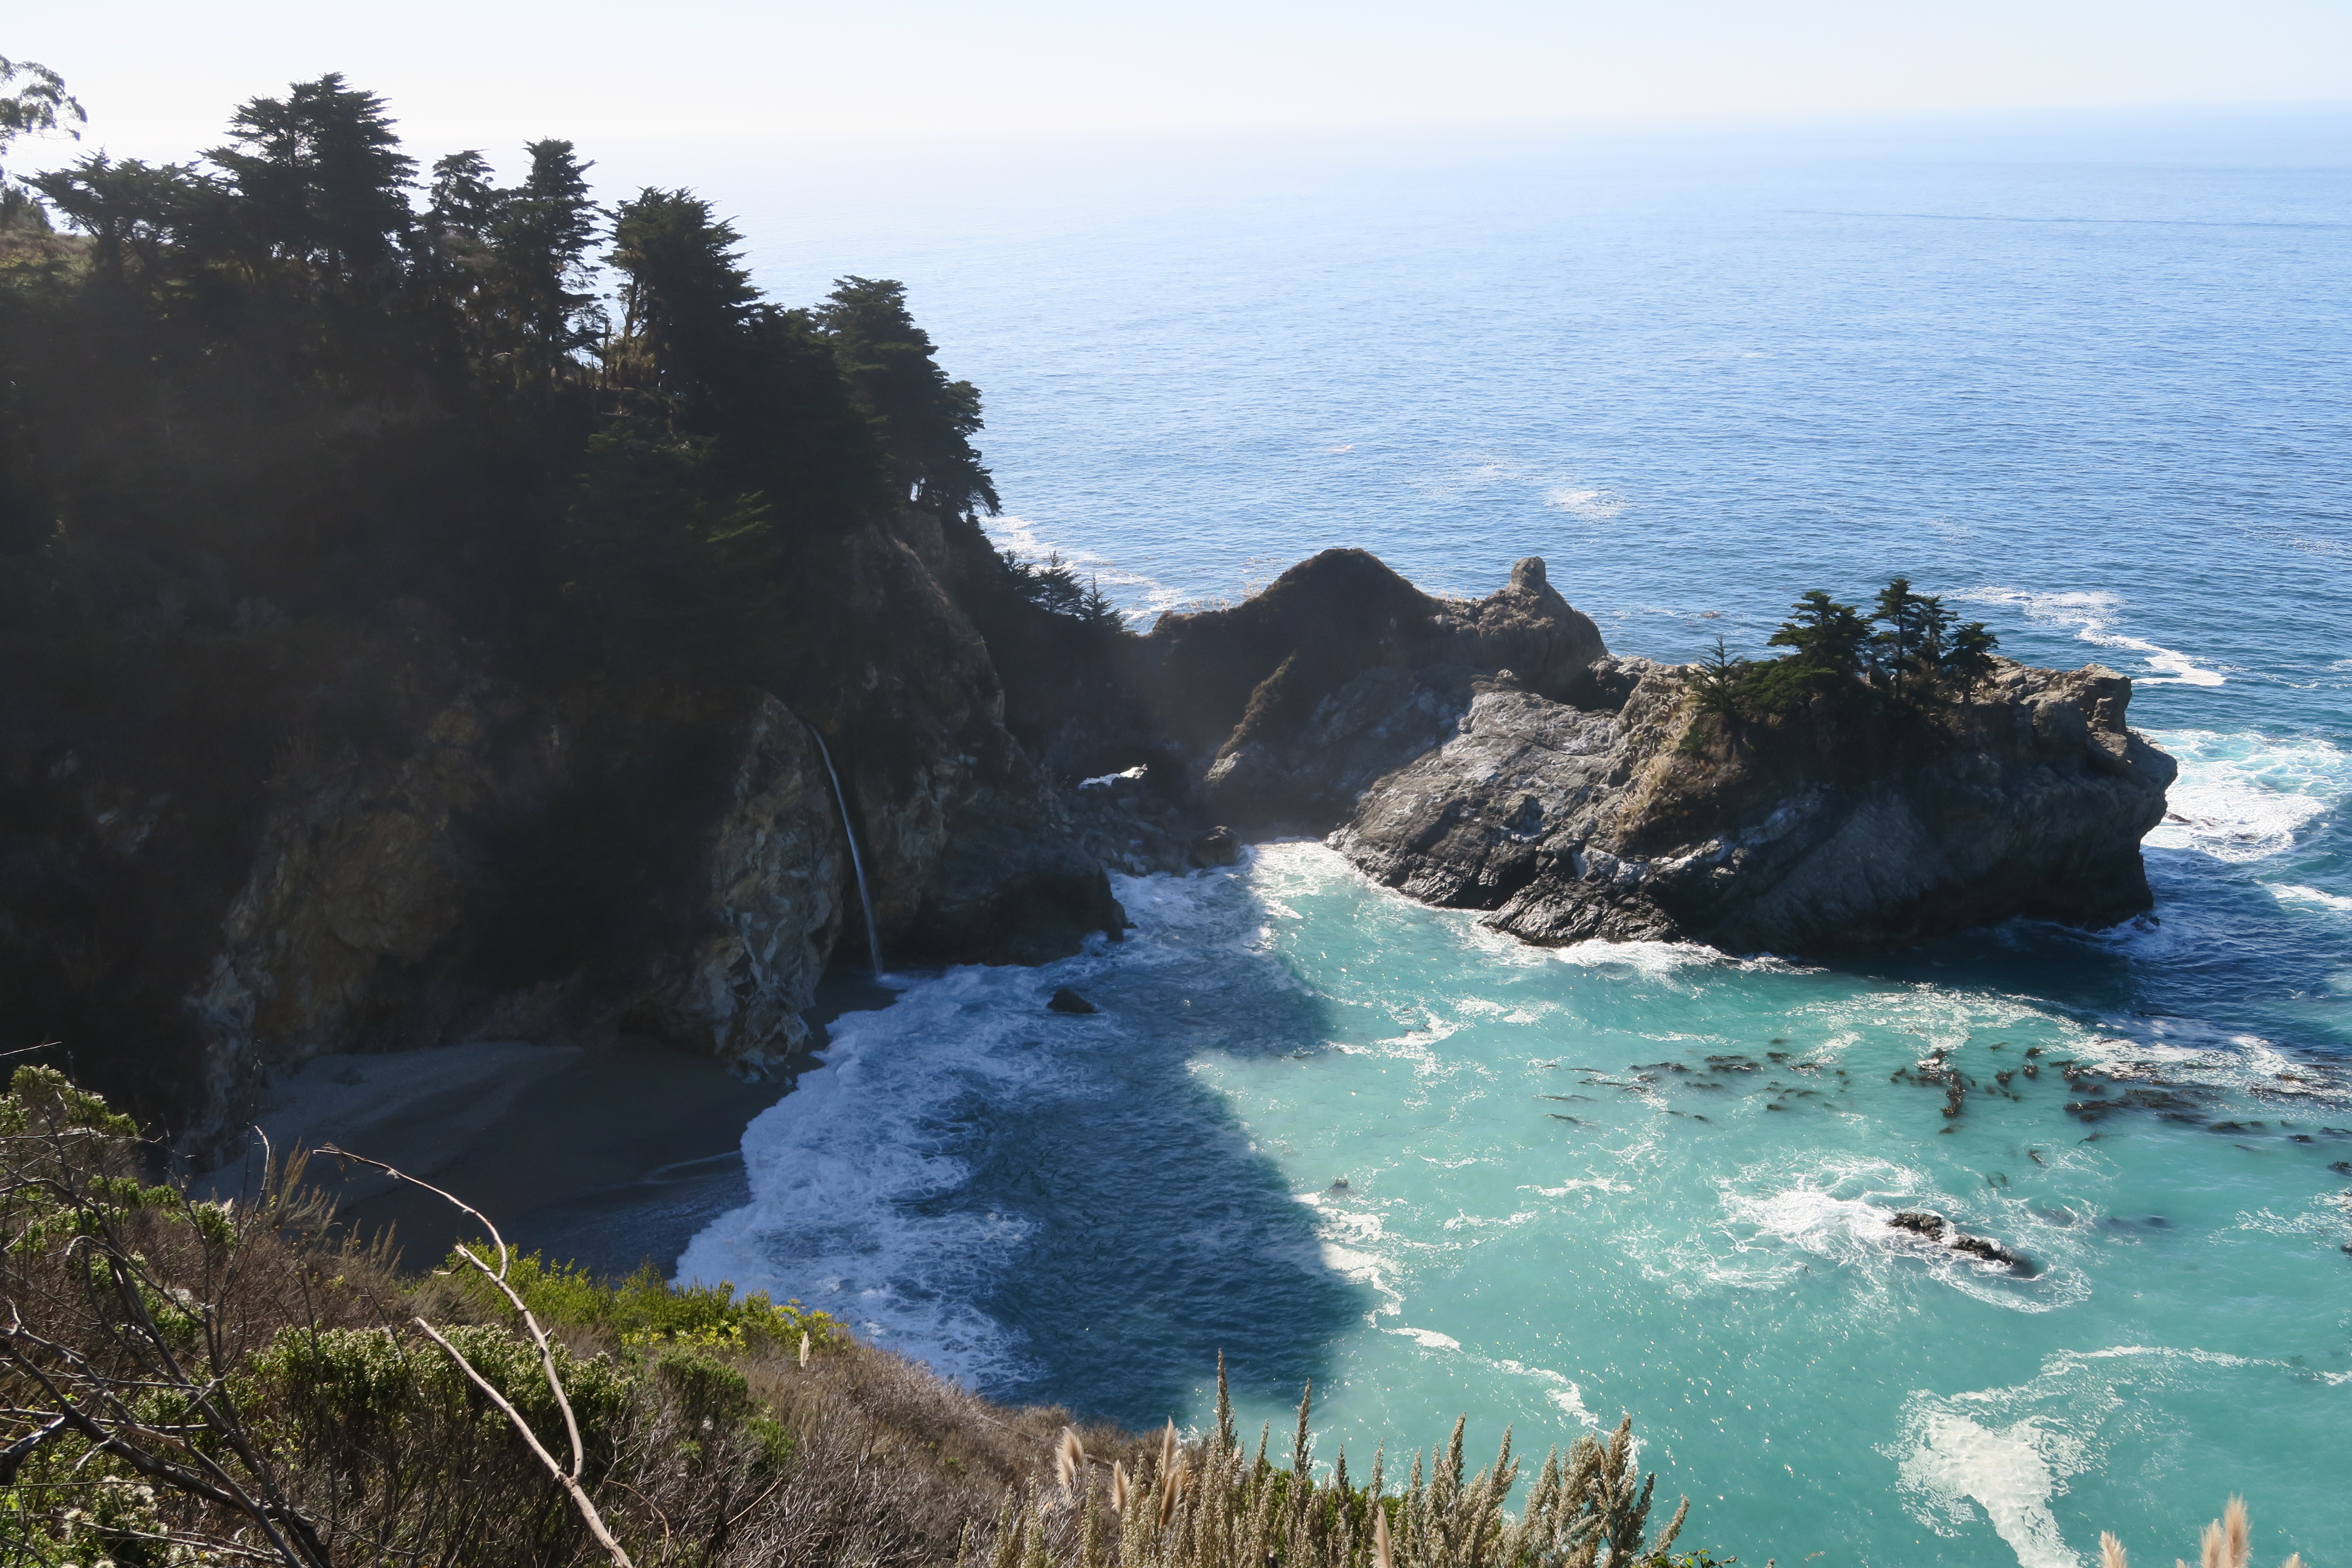 A top-down view of Mcway Falls, with a pristine turquouse blue beach lagoon, surrounded on all sides by rocky cliffs.